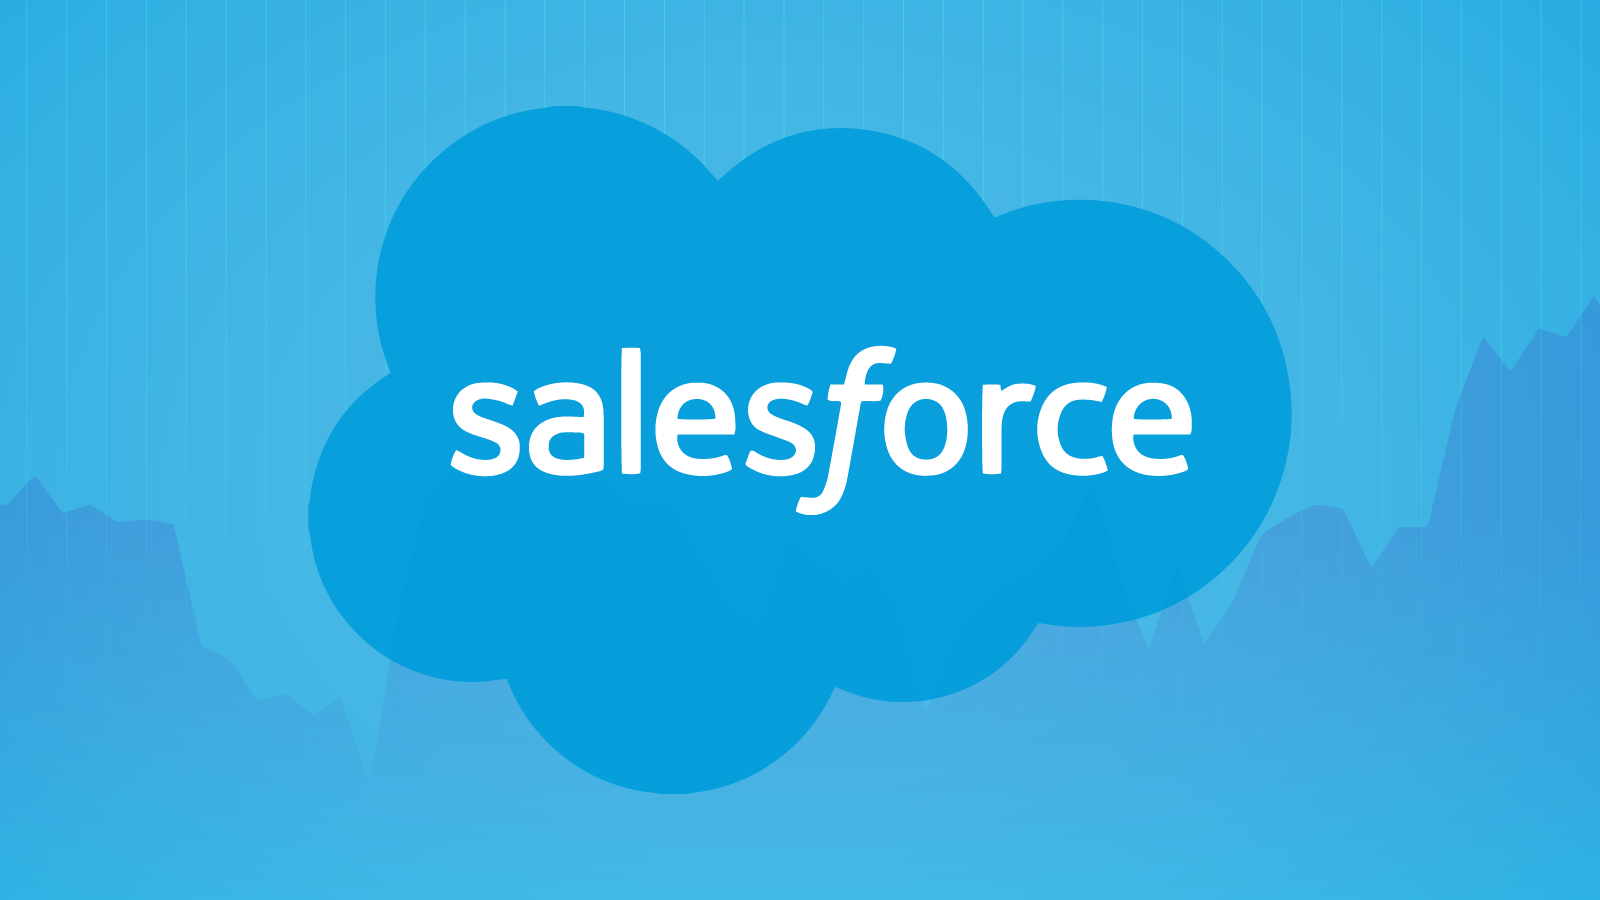 Salesforce Internship for Students and Graduates | Salesforce Internship 2021